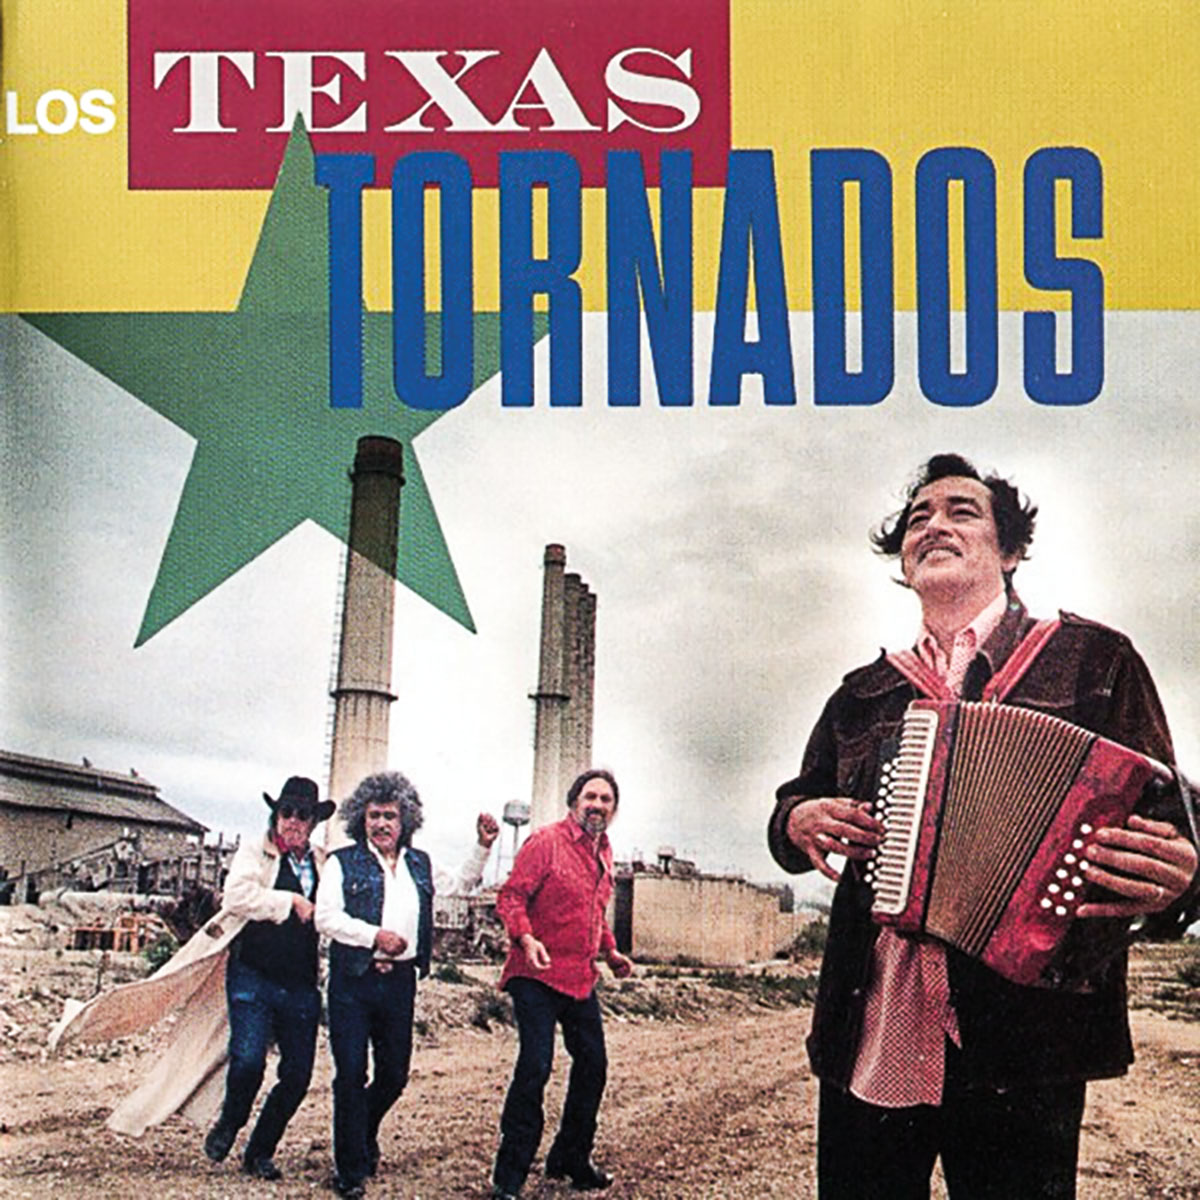 An album cover with bright yellow, red, and blue font reading "Texas Tornados"